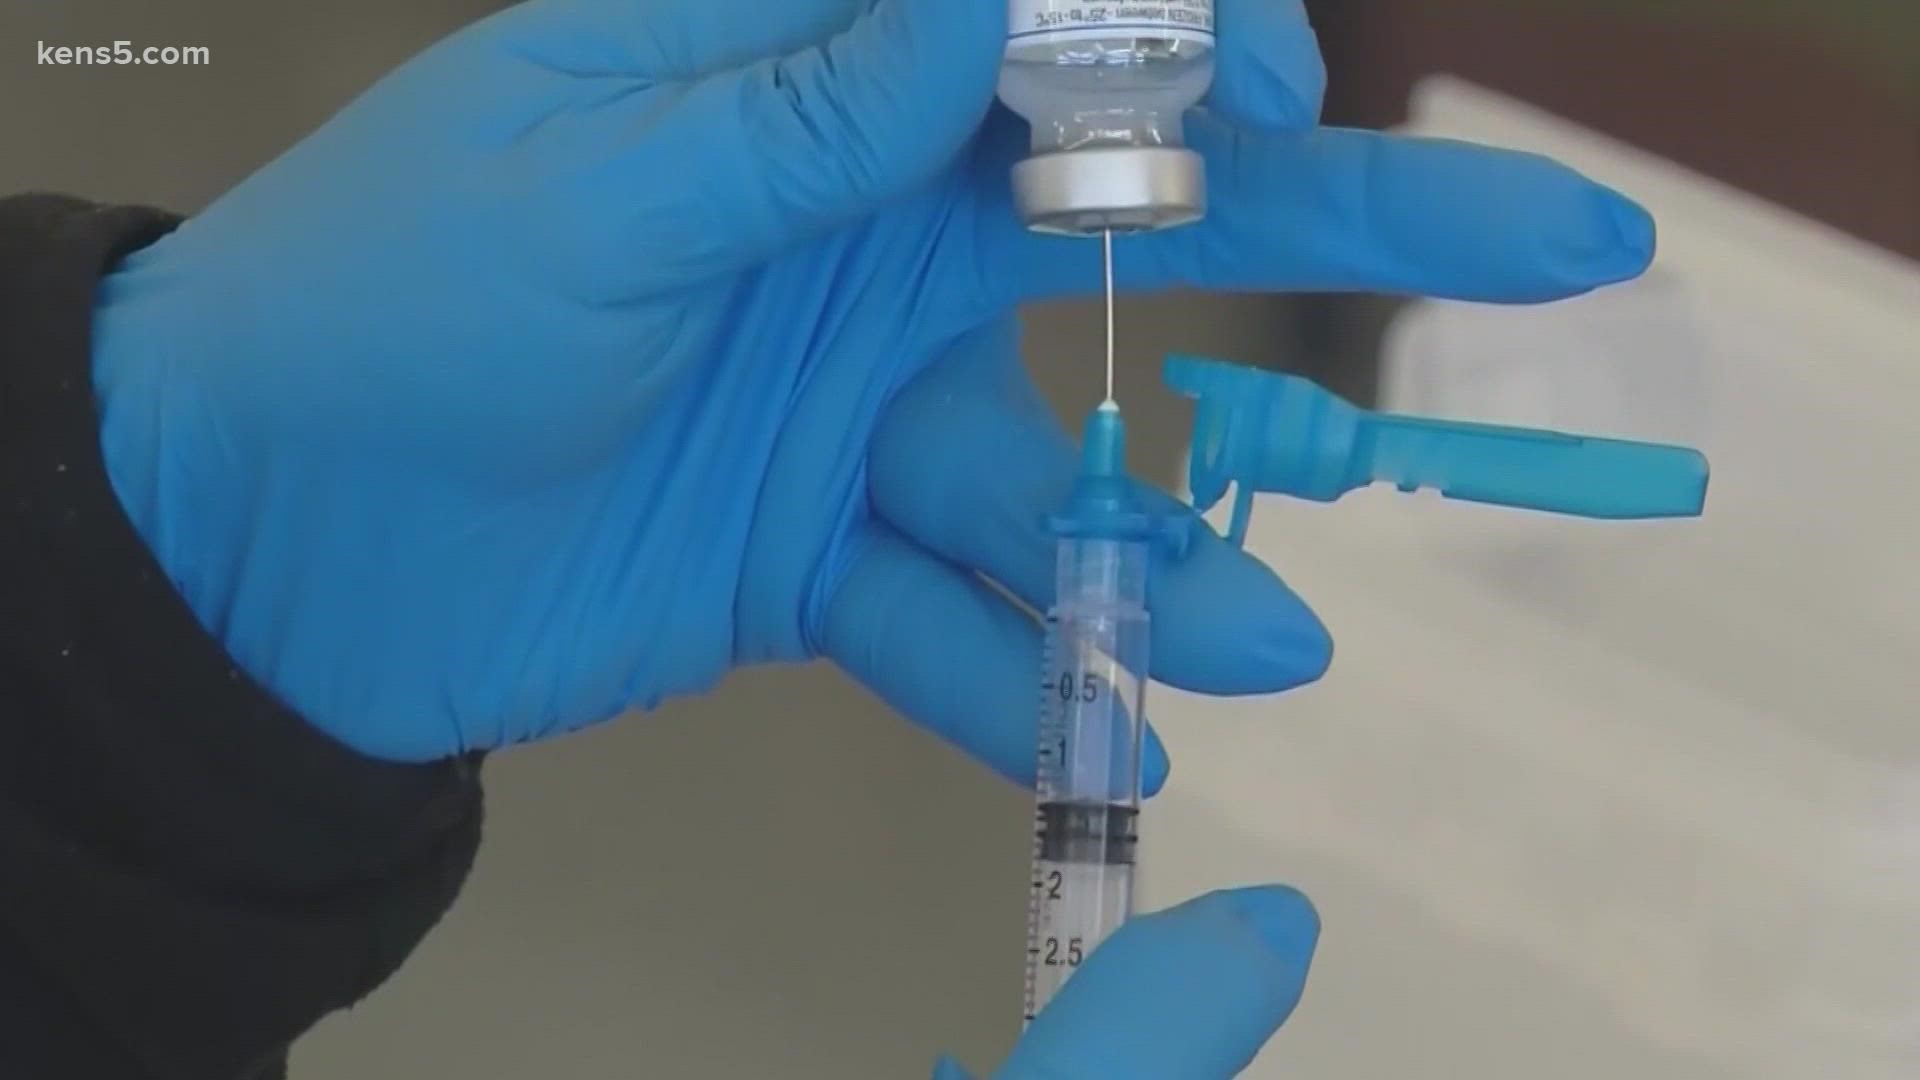 Some couples were worried if the vaccine would affect their chances of getting pregnant.